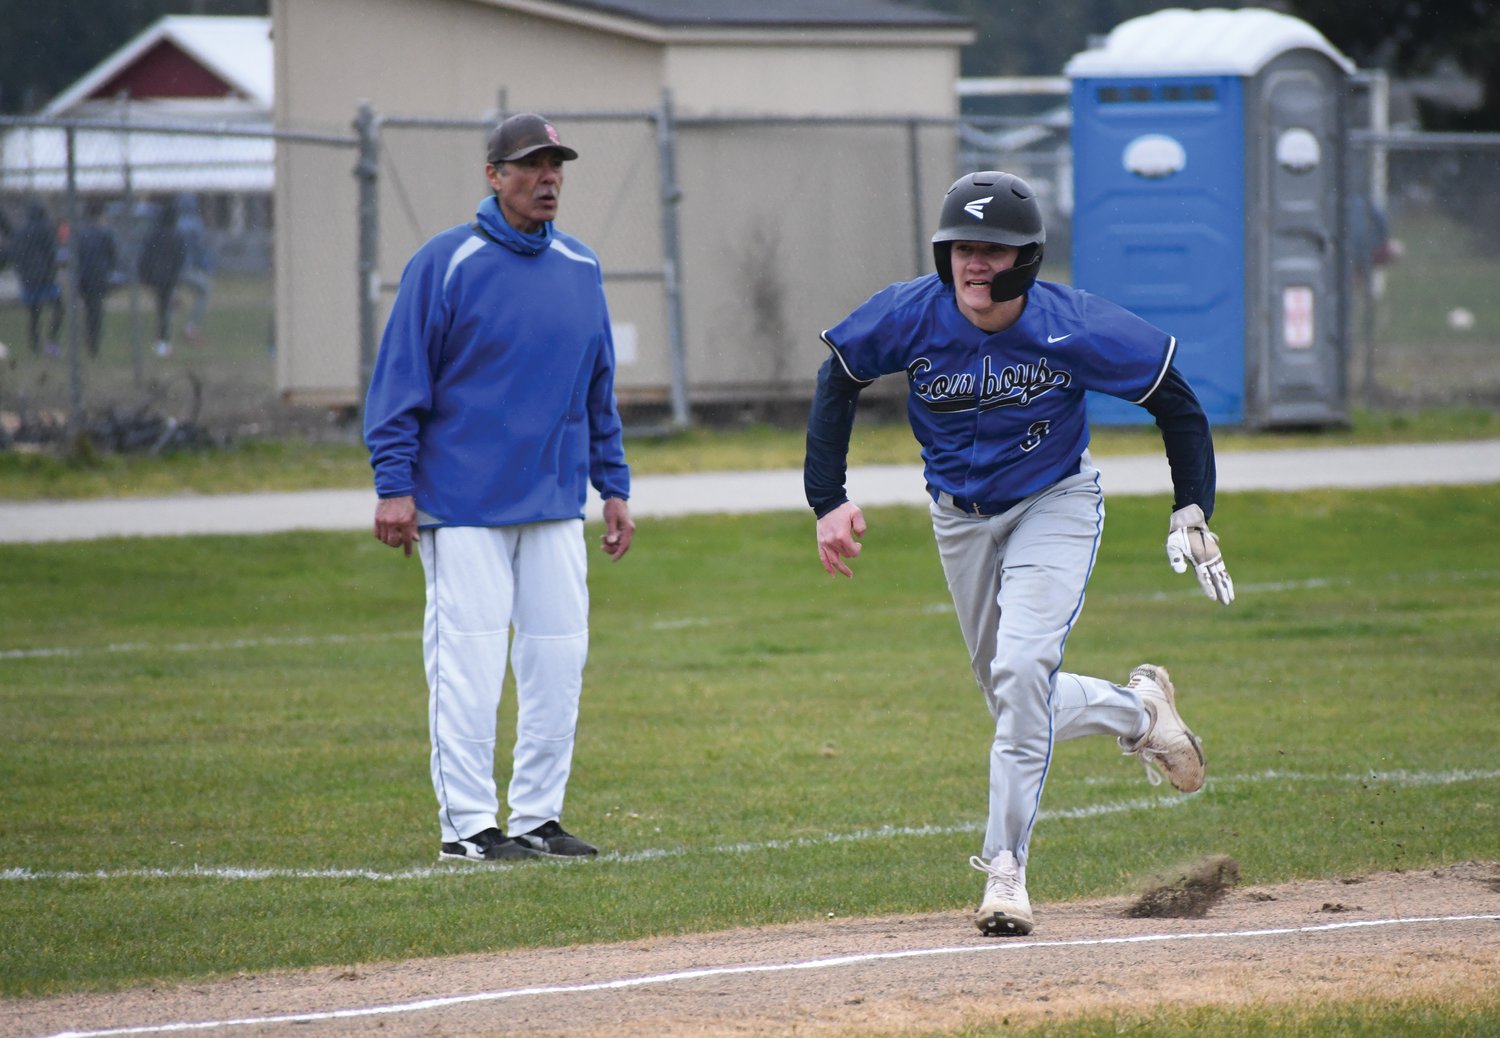 Marcus Ritch of the Rivals rounds third base and sprints toward home plate to score a run.